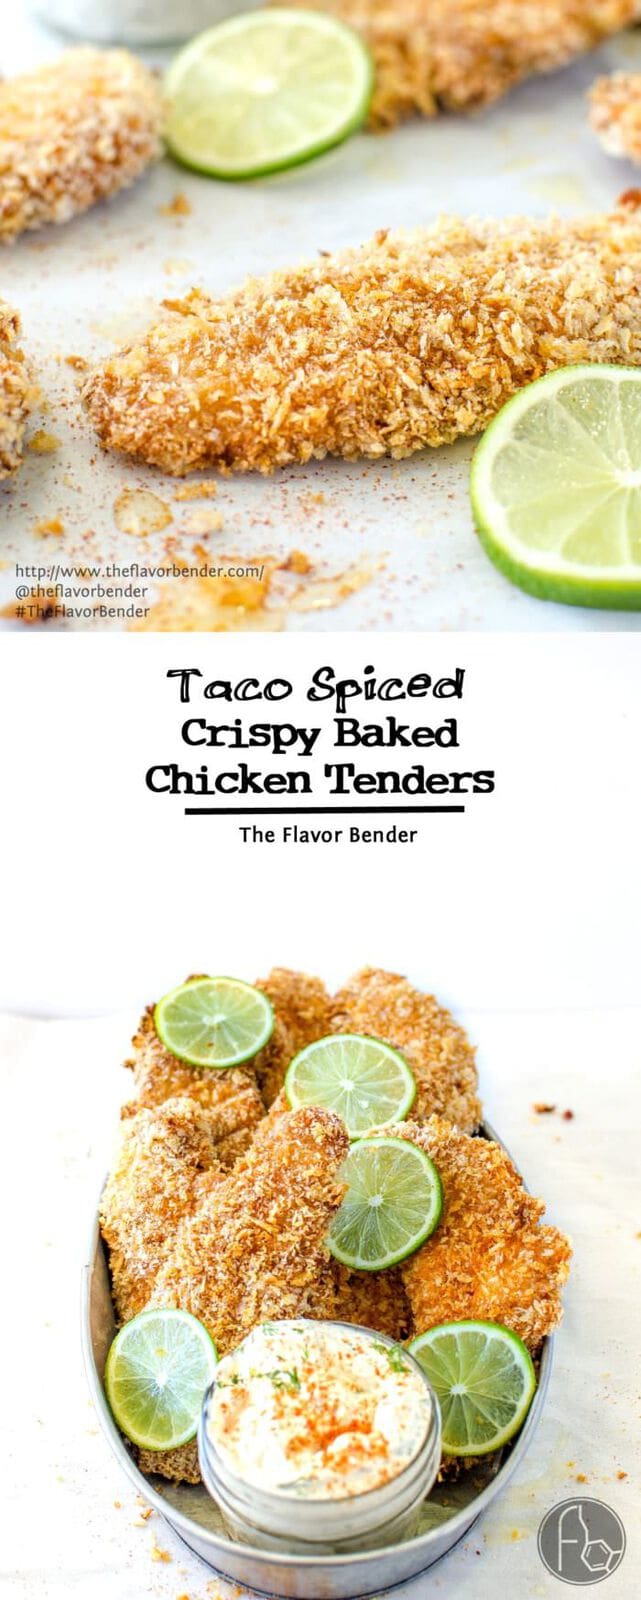 Taco Spiced Crispy Baked Chicken Tenders -  are absolutely THE BEST baked, crunchy chicken tenders, with a crispy and flavorful twist with a golden panko bread crumb coating and a taco spiced seasoning. Perfect with a Herb and lime Sour Cream dip! CLICK to get recipe. REPIN for later! #TheFlavorBender